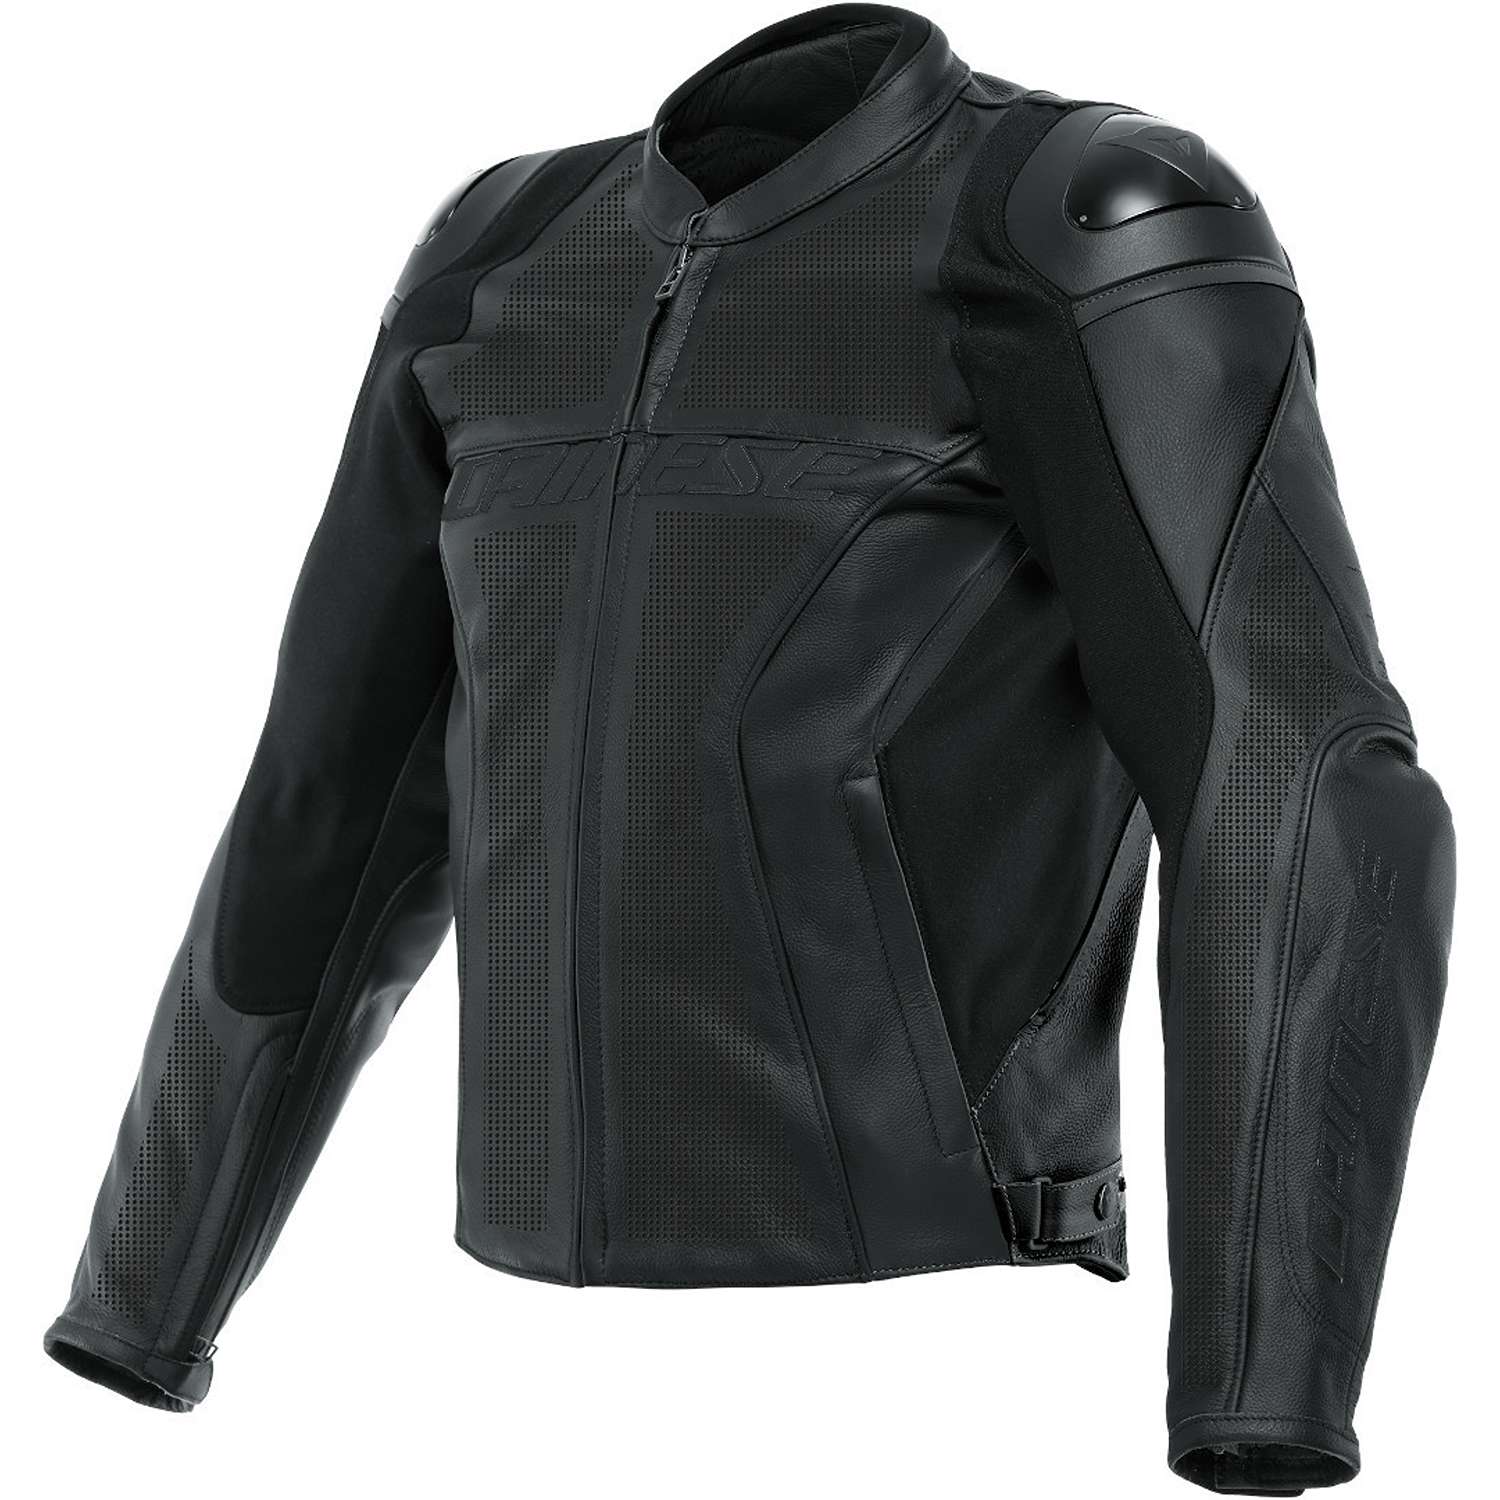 Image of Dainese Racing 4 Leather Jacket Perf Black Size 48 ID 8051019483591